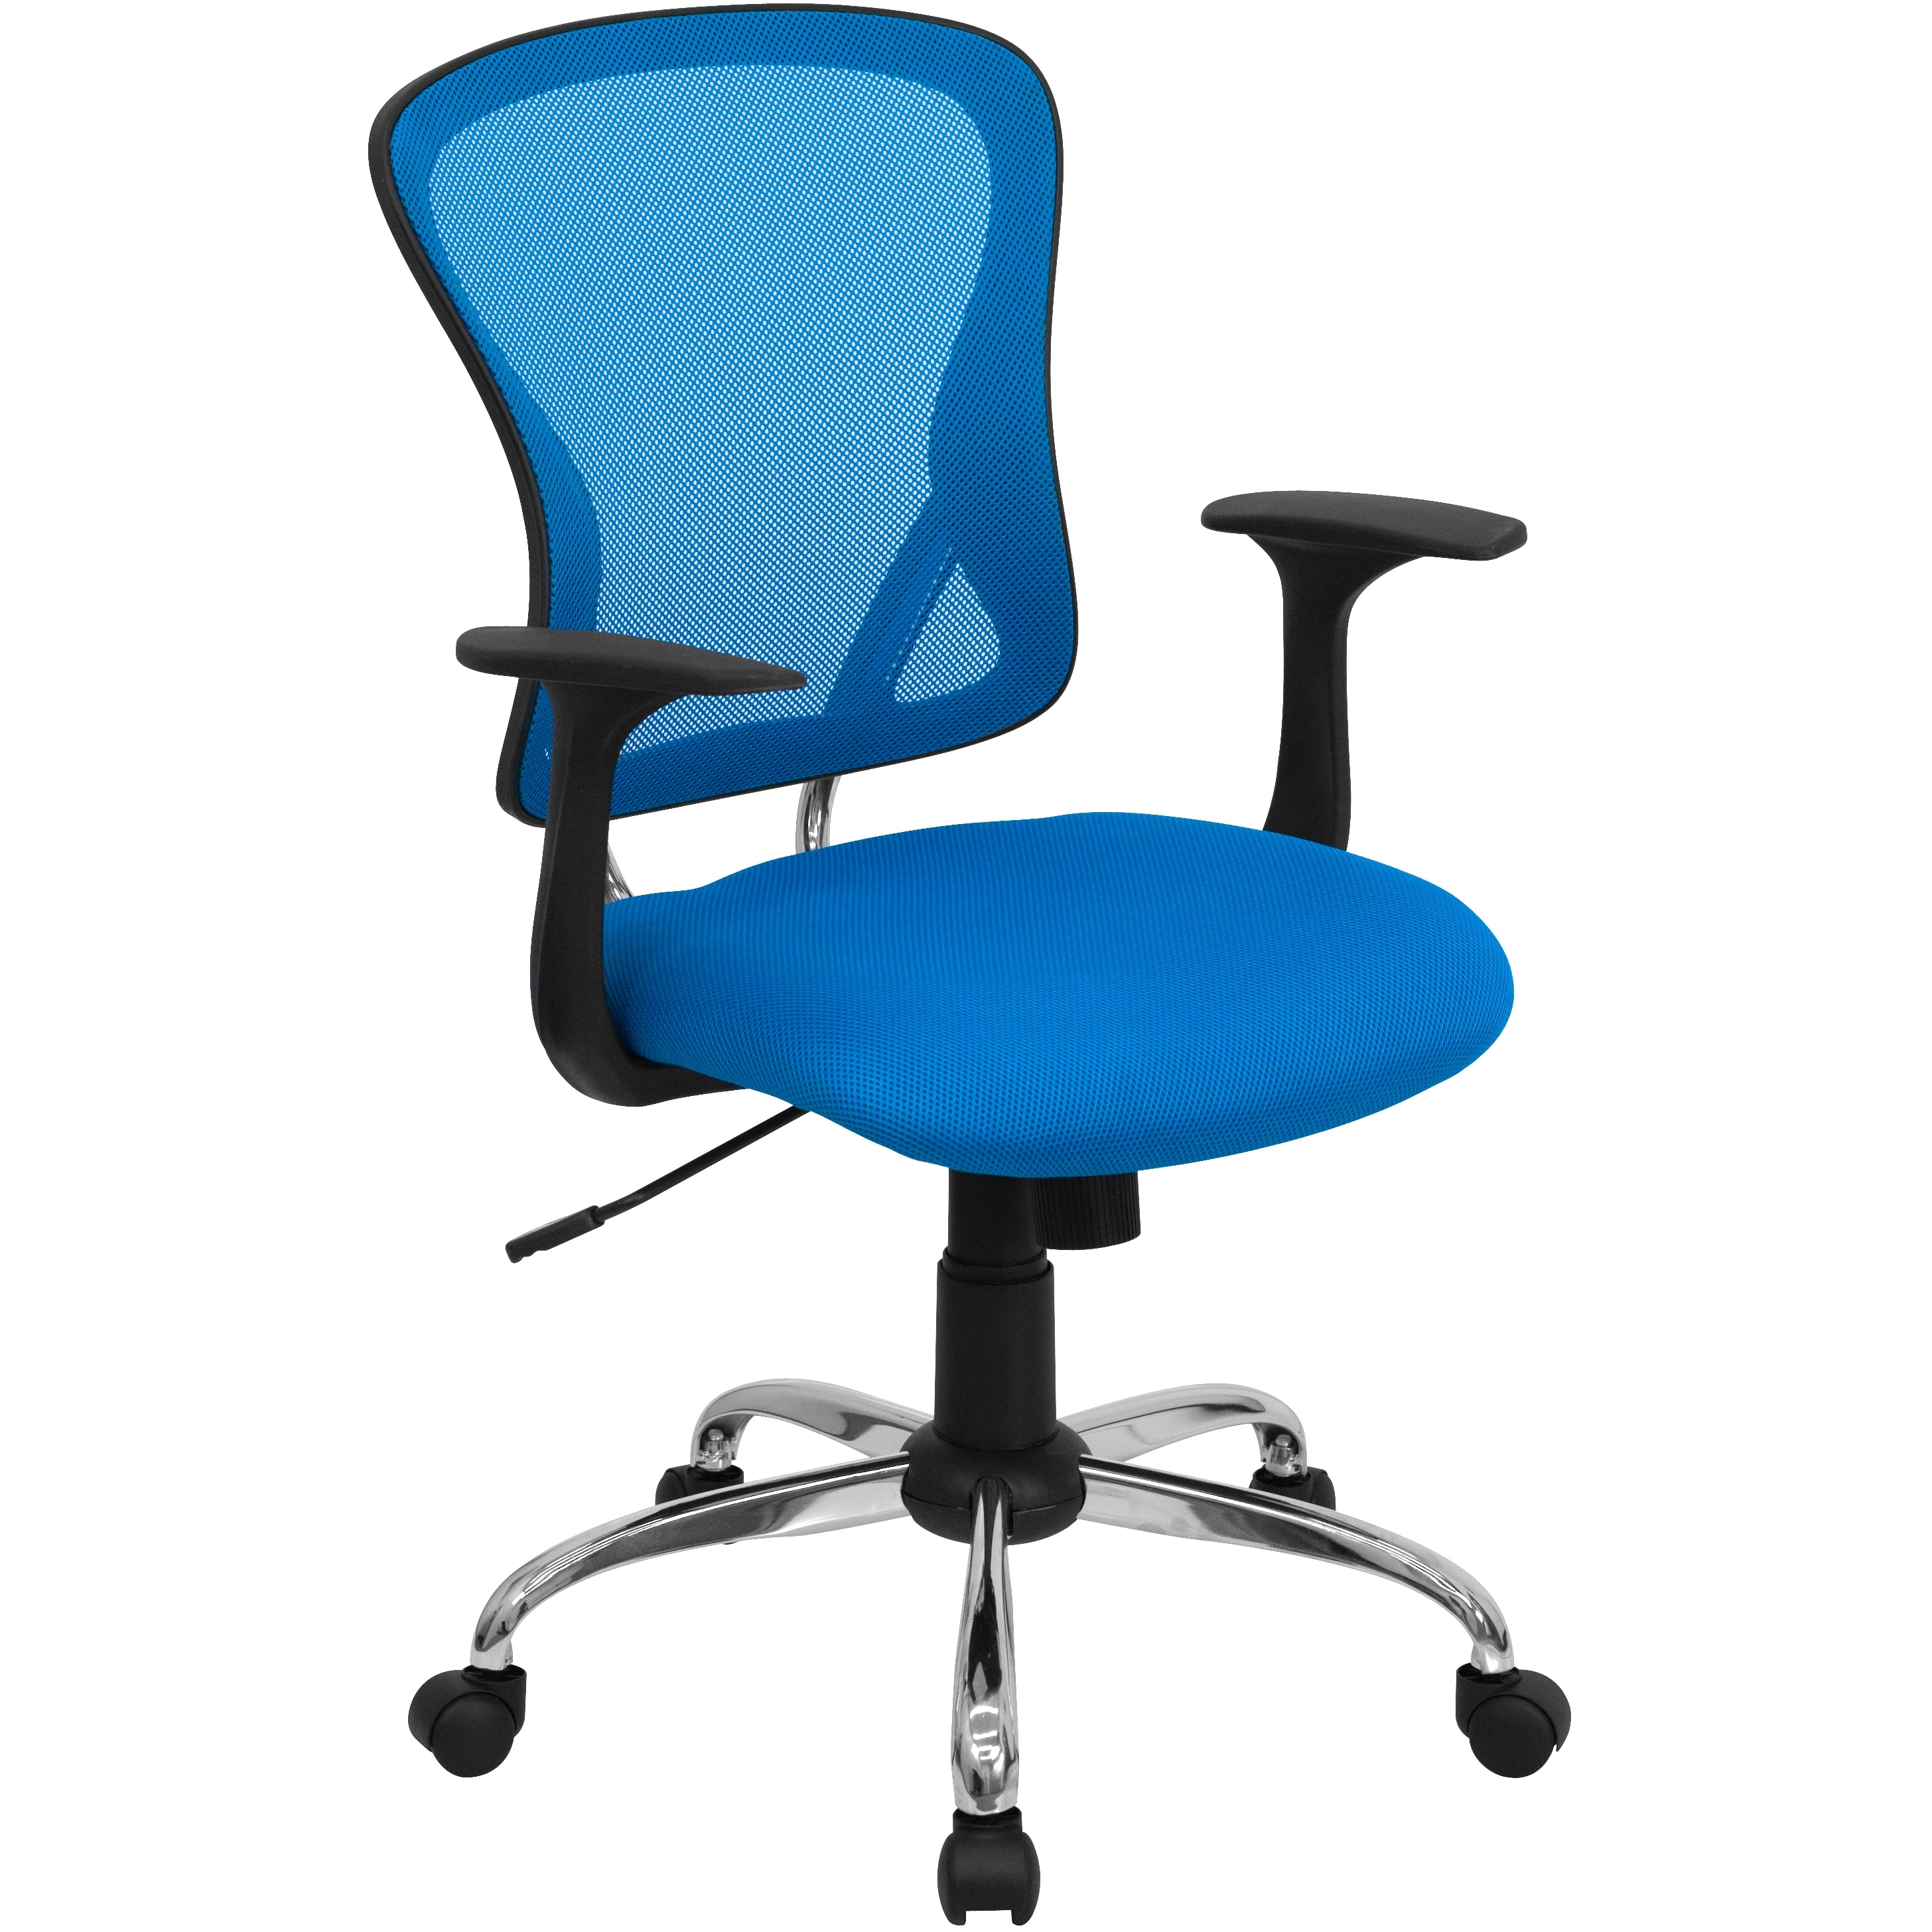 https://ak1.ostkcdn.com/images/products/is/images/direct/2e4828ac195efa37da940ee9feaca0359bae8b86/Mid-Back-Mesh-Swivel-Task-Office-Chair-with-Chrome-Base-and-Arms.jpg